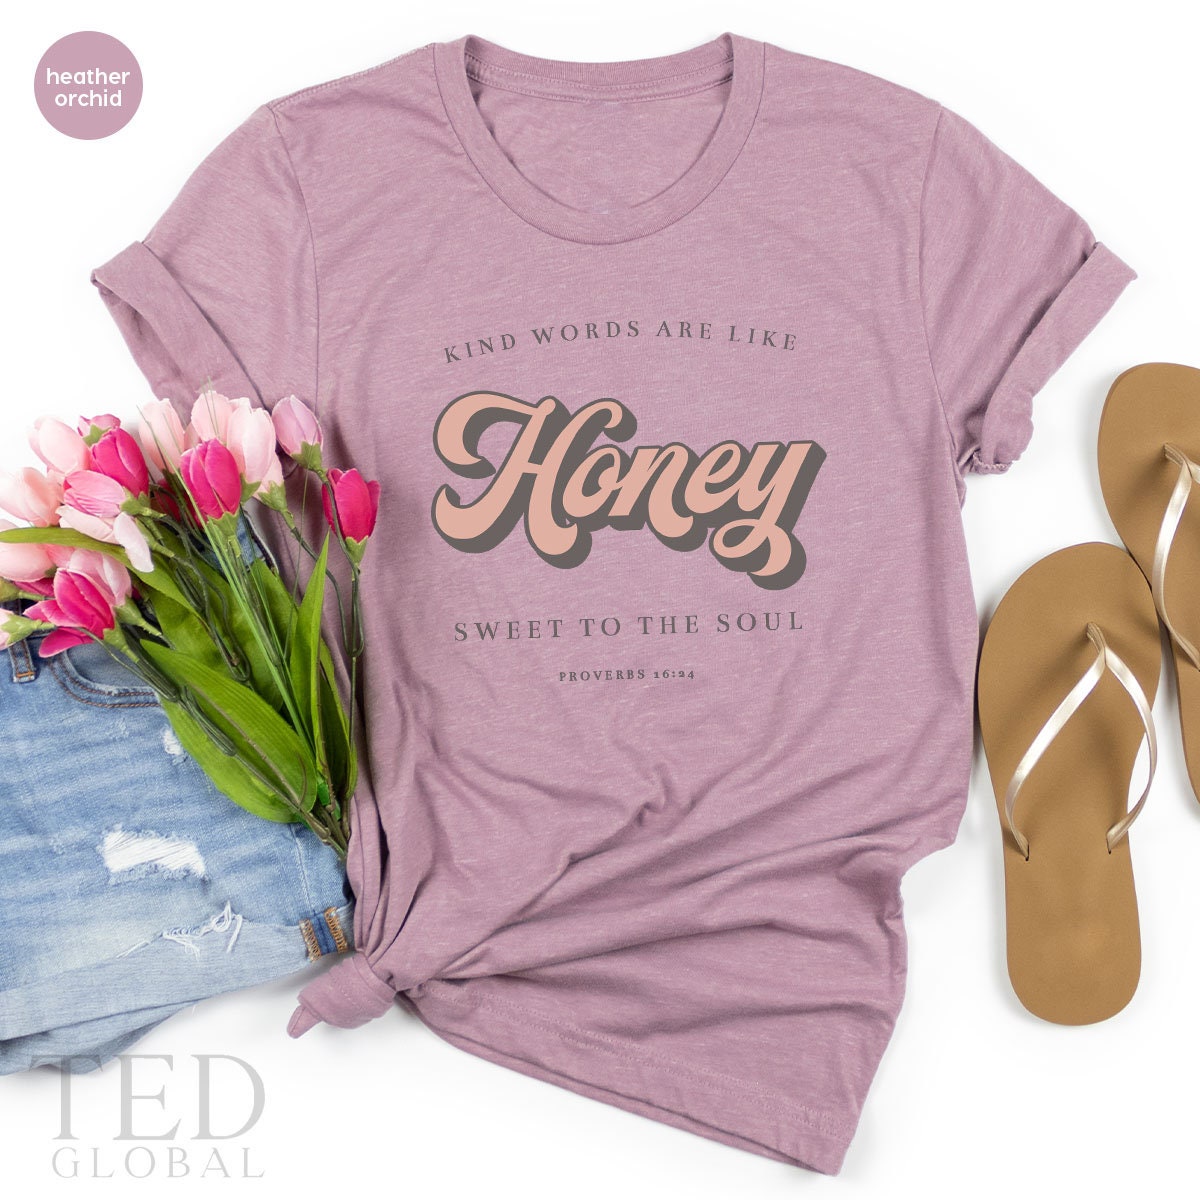 Honey Shirt, Proverbs 16:24 T Shirt, Retro 6Os-70s T Shirt, Sweet To The Soul Shirts, Christian Tee, Religious T-Shirt, Gift For Religious - Fastdeliverytees.com